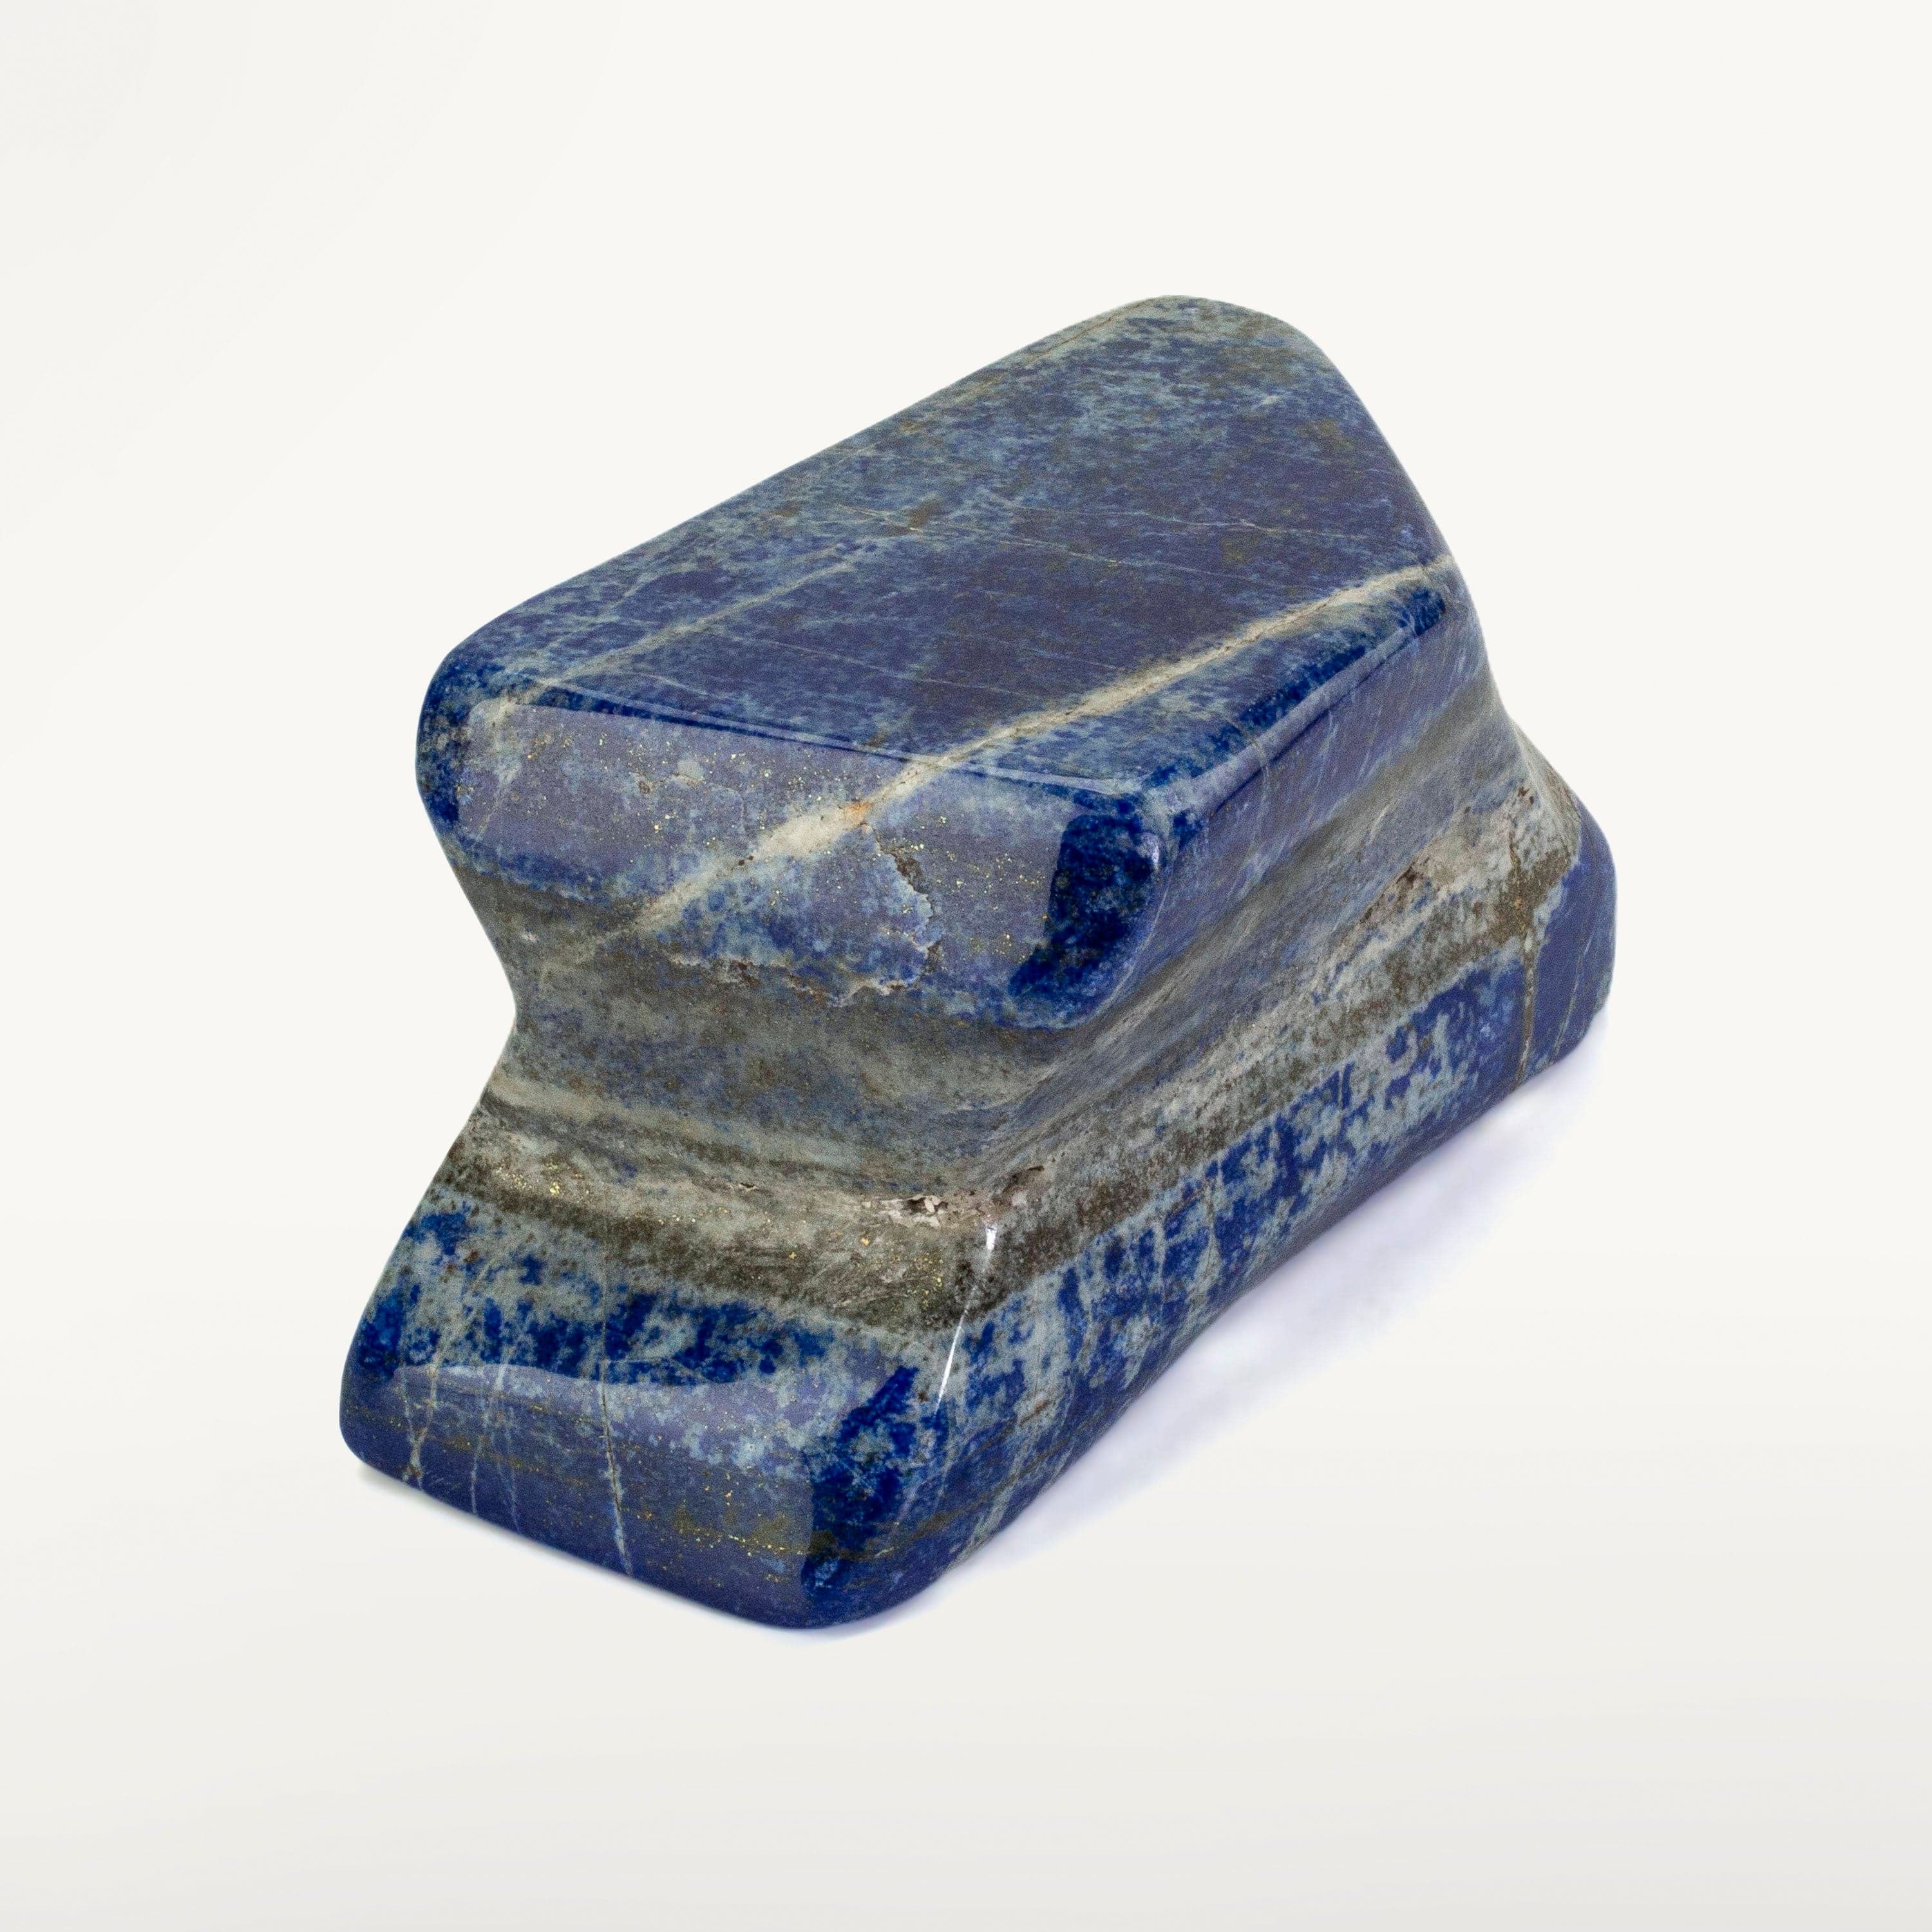 Kalifano Lapis Lapis Lazuil Freeform from Afghanistan - 1.2 kg / 2.6 lbs LP1300.004